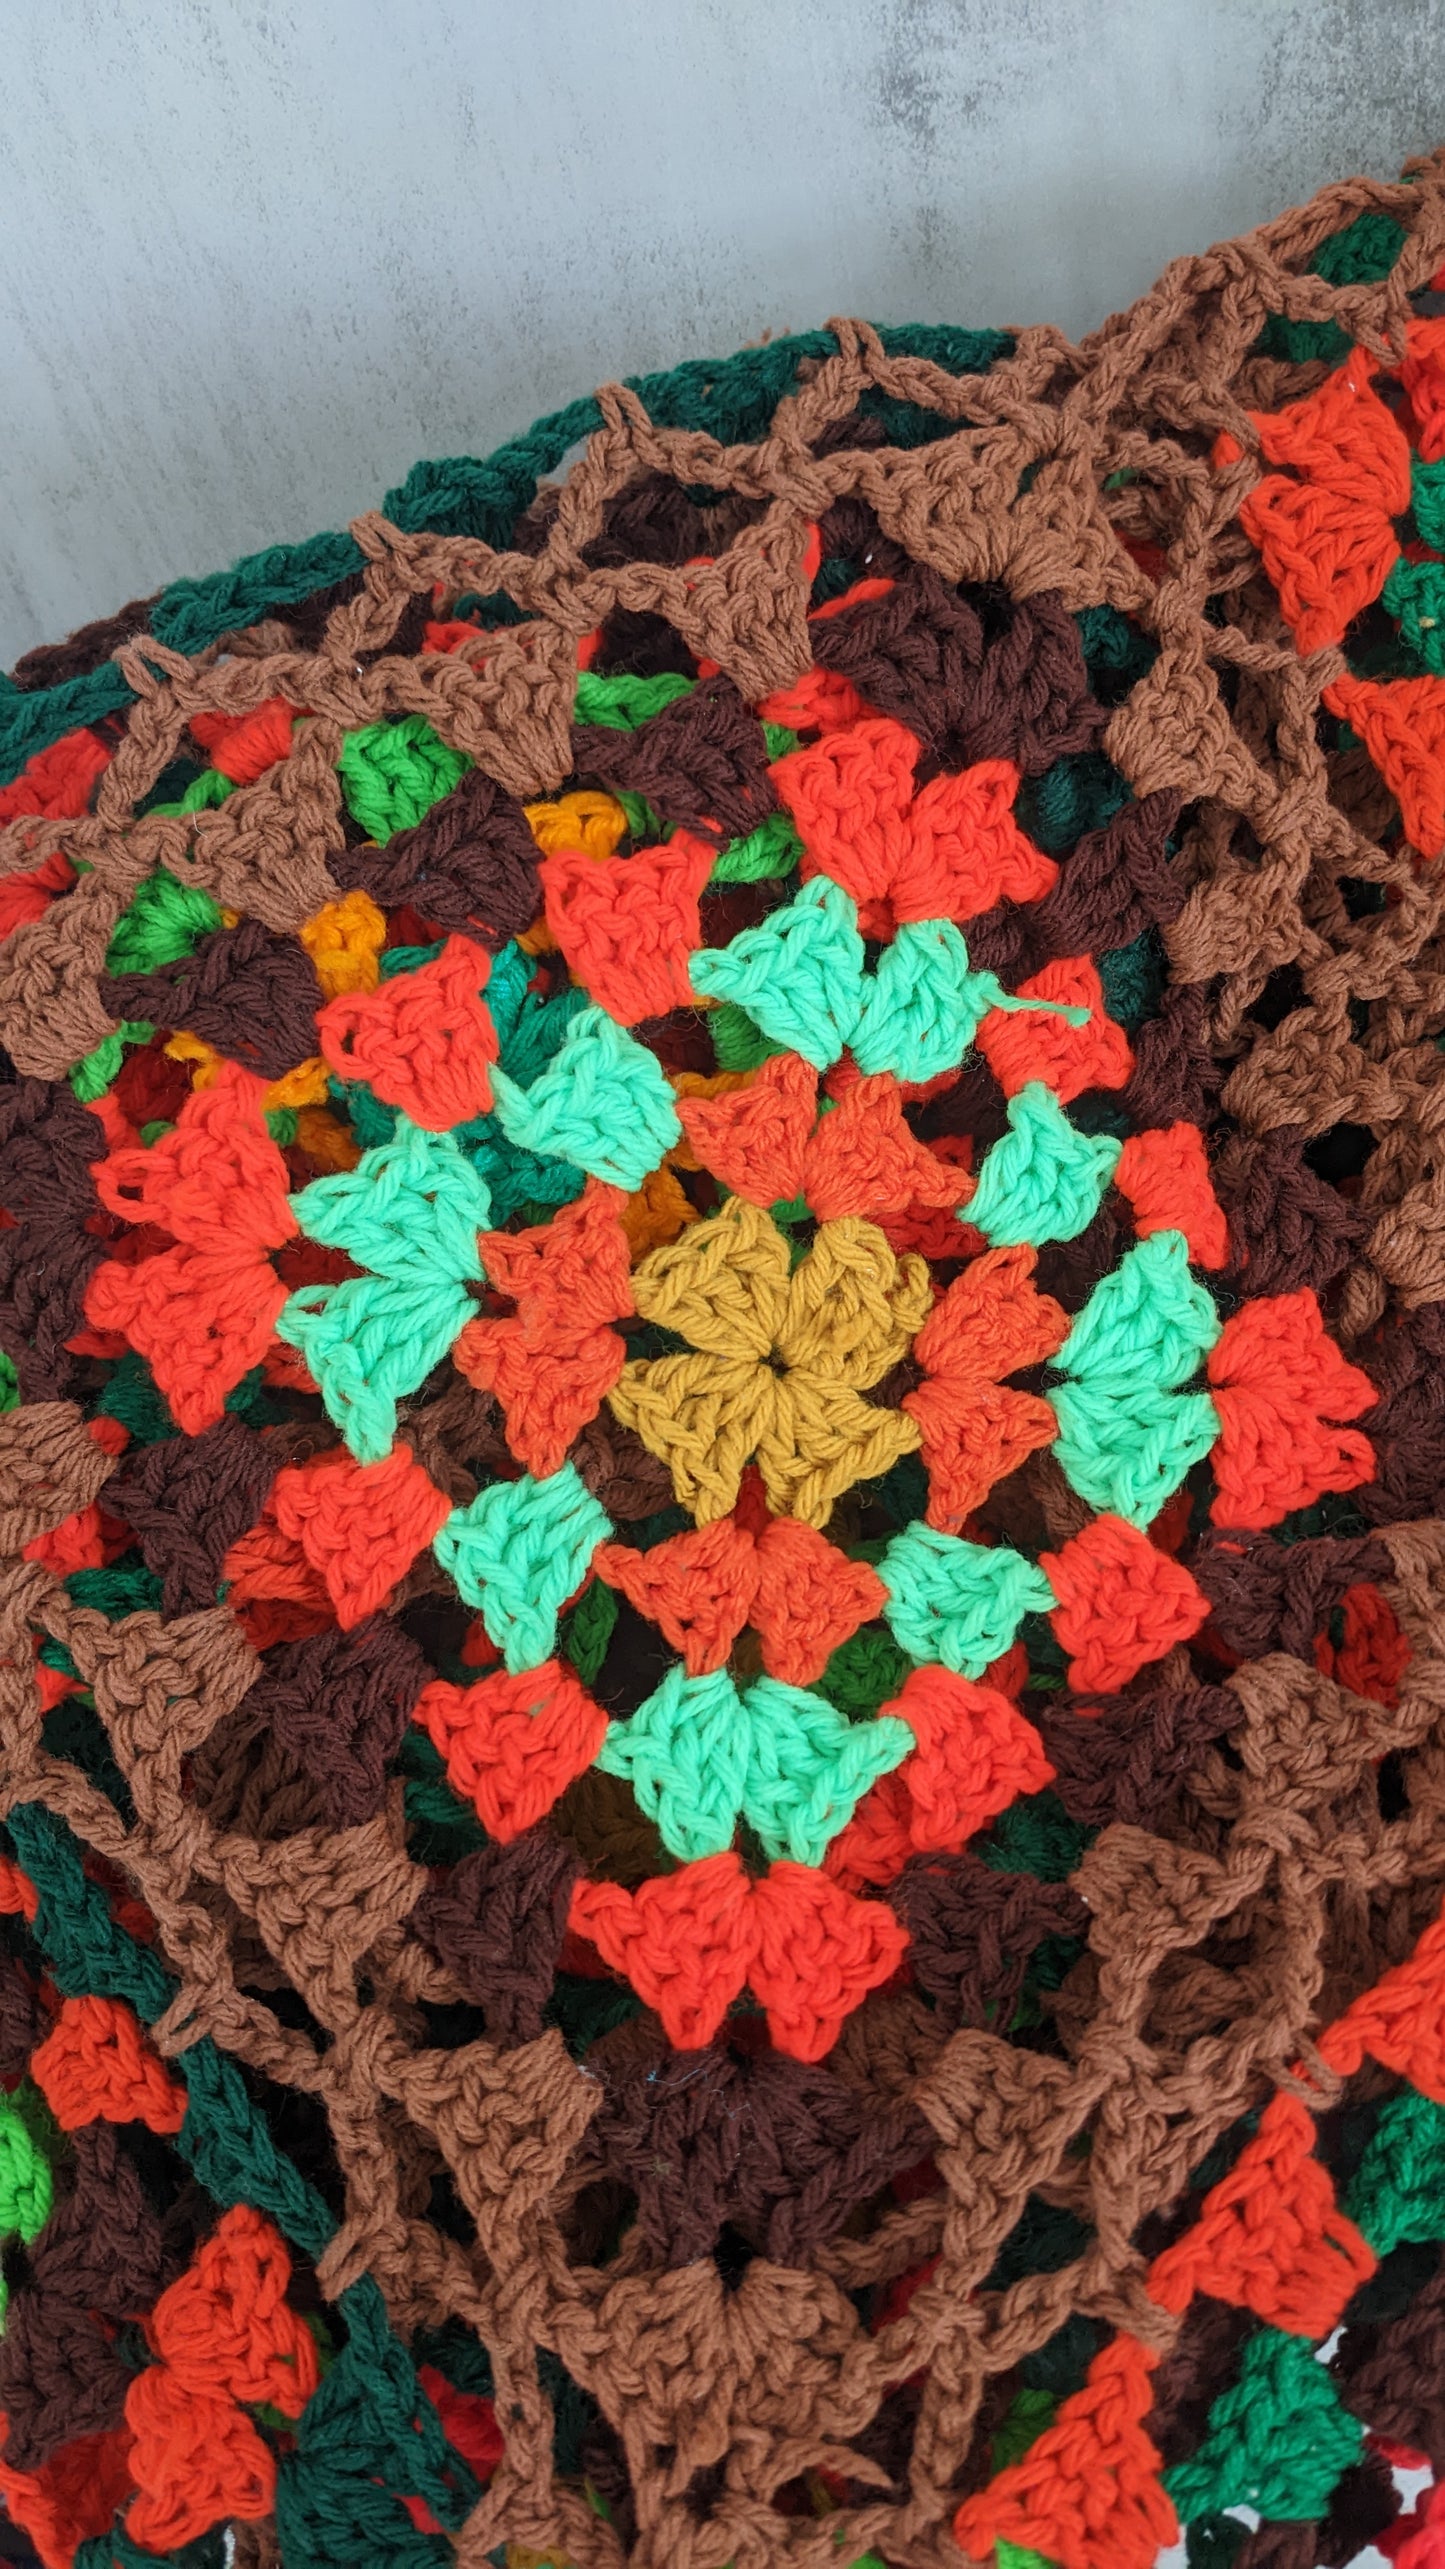 HandMade Brown, Red, Yellow, Orange and Green Granny Square Afghan 81"x95" Pumpkin Patch